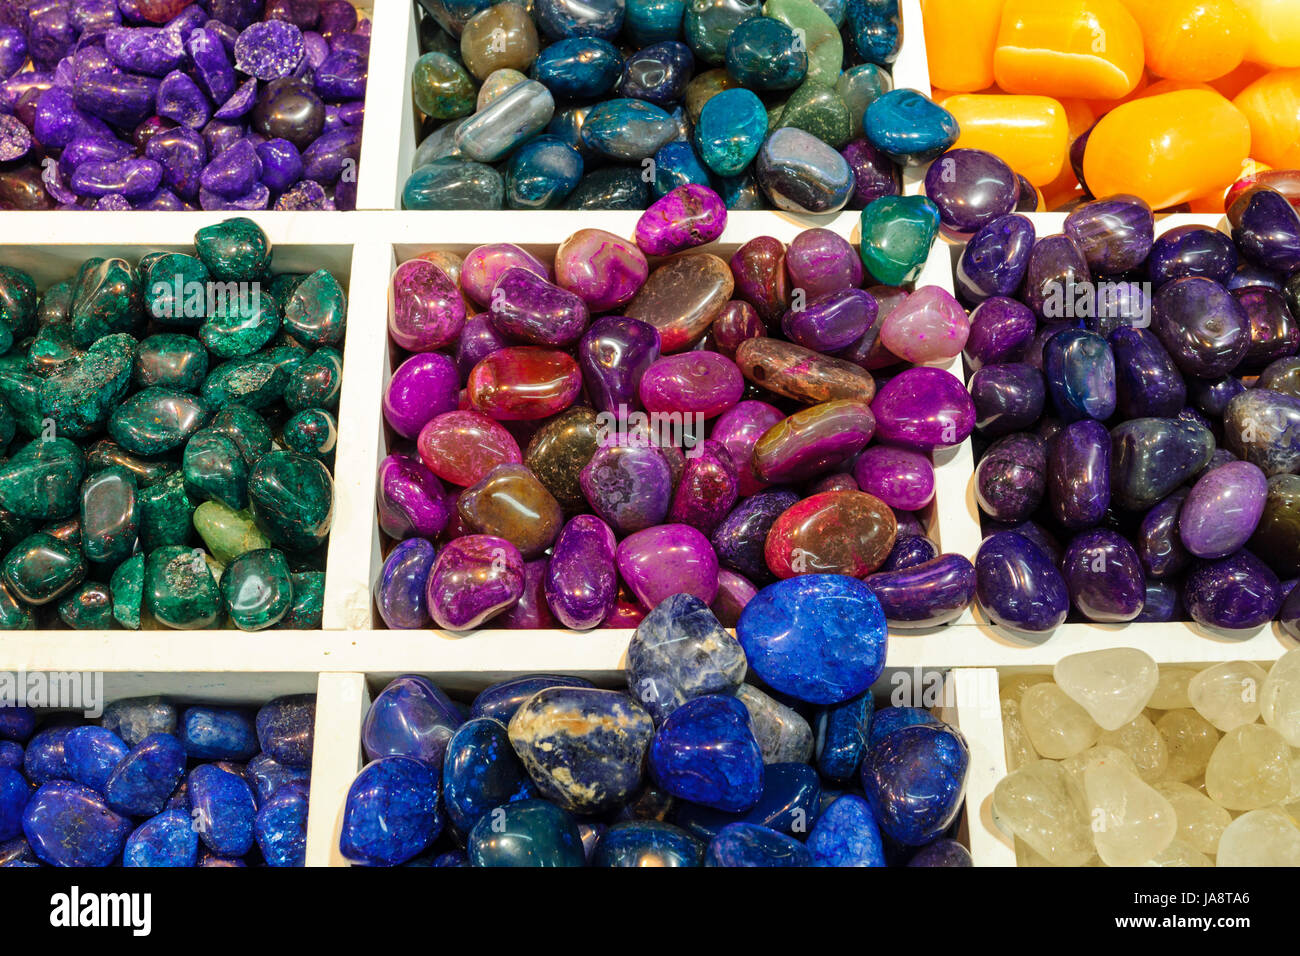 coloured, colourful, gorgeous, multifarious, richly coloured, gemstones, Stock Photo